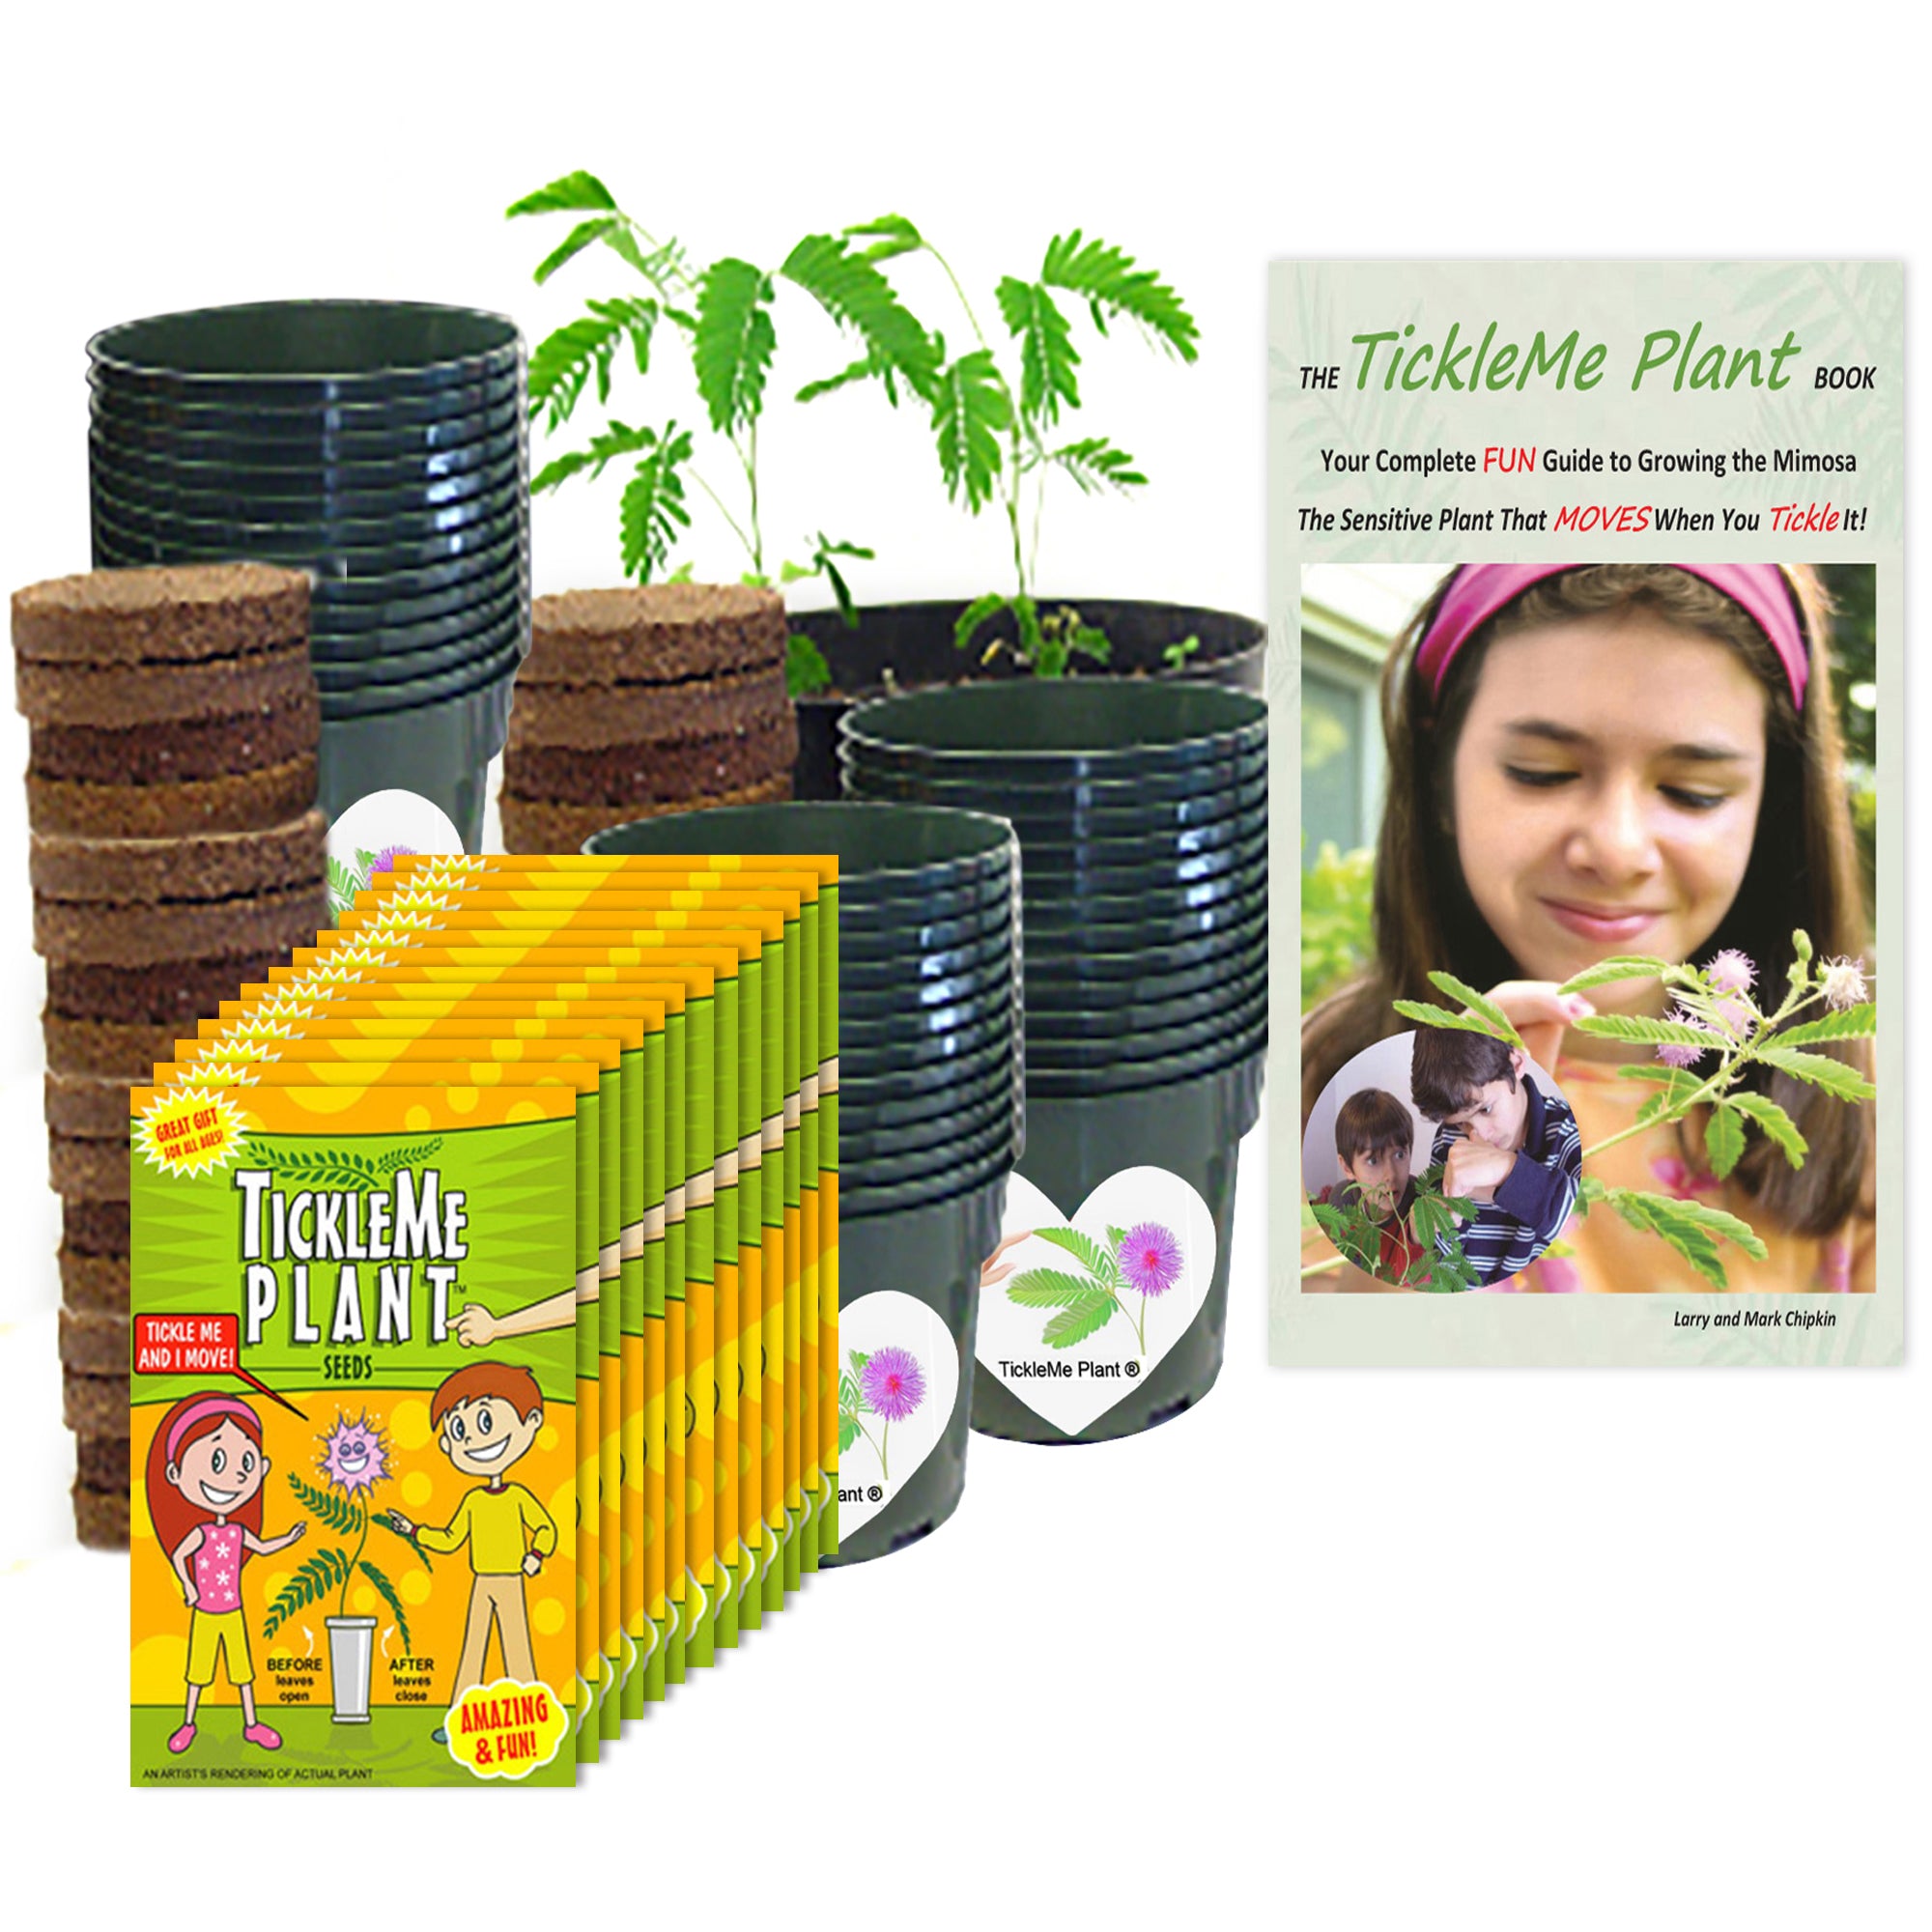 TickleMe Plant Classroom Science Party kit - For 30 Students!